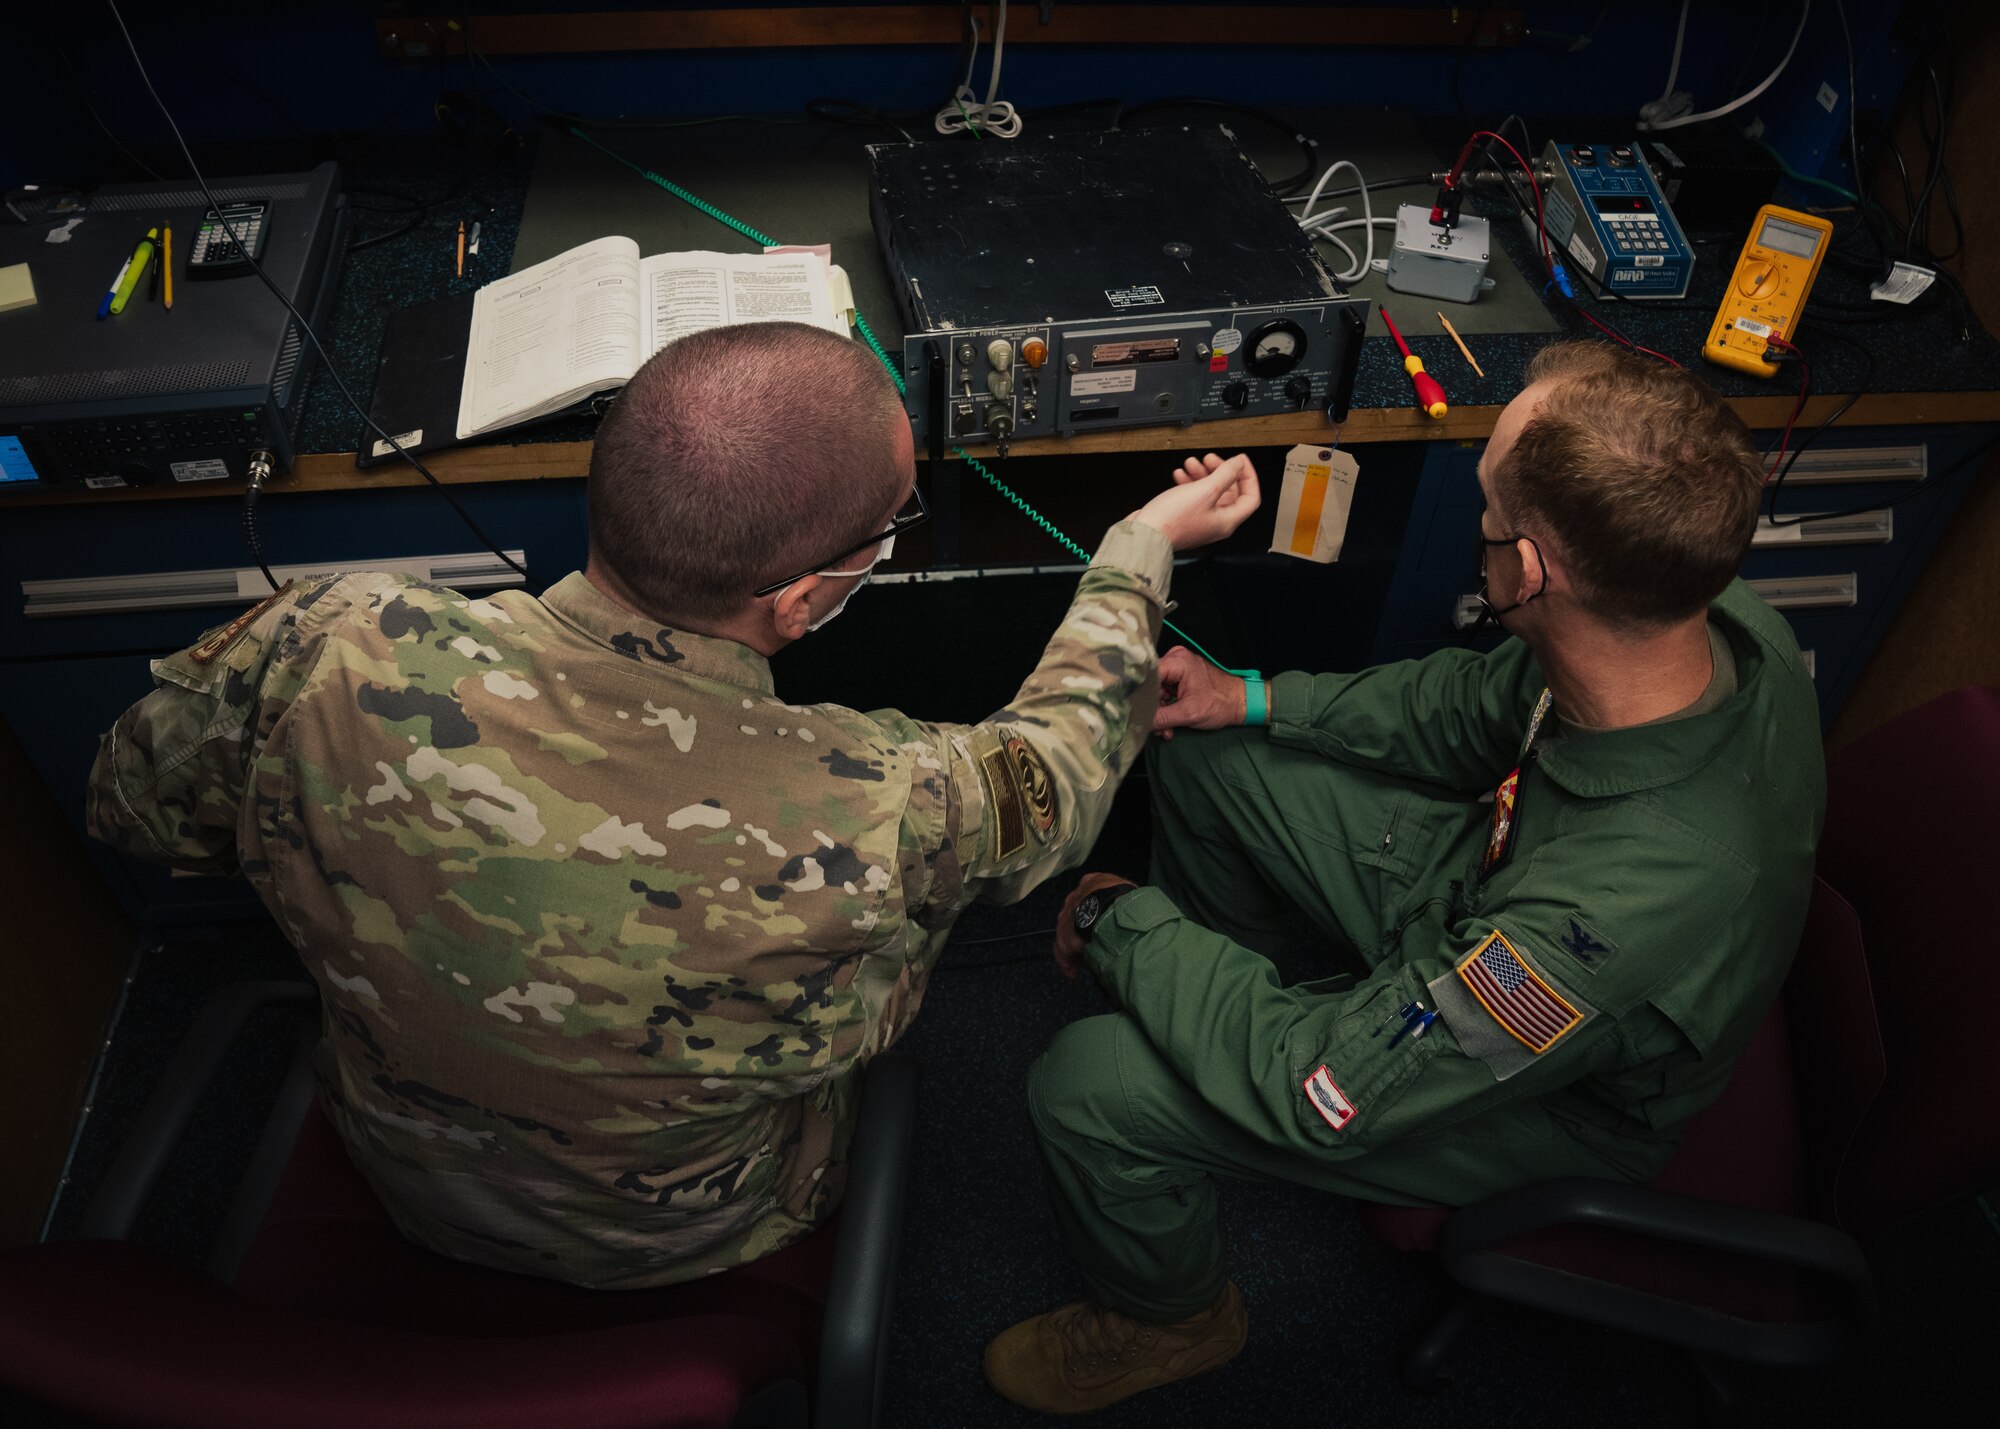 U.S. Air Force Airman 1st Class Ryan McIlroy, 6th Operation Support Squadron Radar Airfield and Weather Systems (RAWS) technician, demos equipment for U.S. Air Force Col. Benjamin Jonsson, 6th Air Refueling Wing commander, at MacDill Air Force Base, Florida, Feb. 24, 2022.